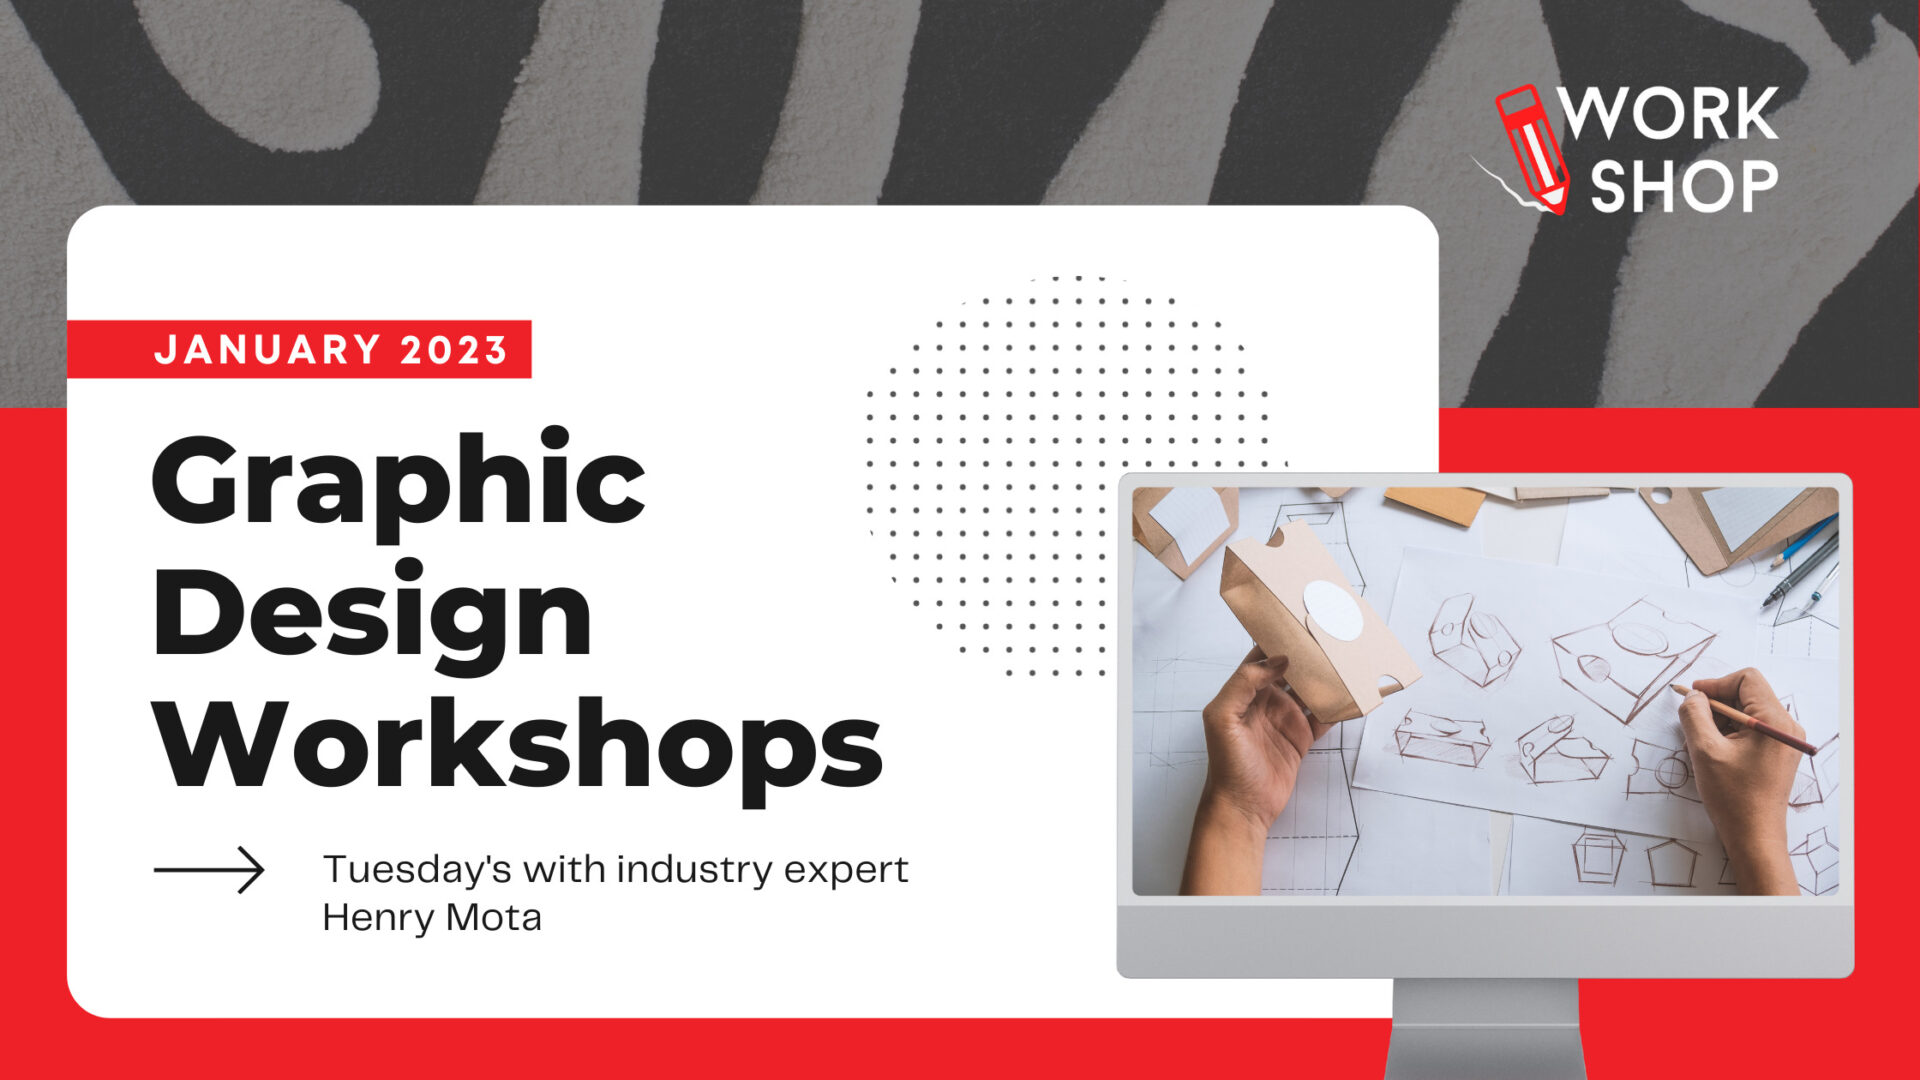 Level-up Your Design Skills with our January Graphic Design Workshops